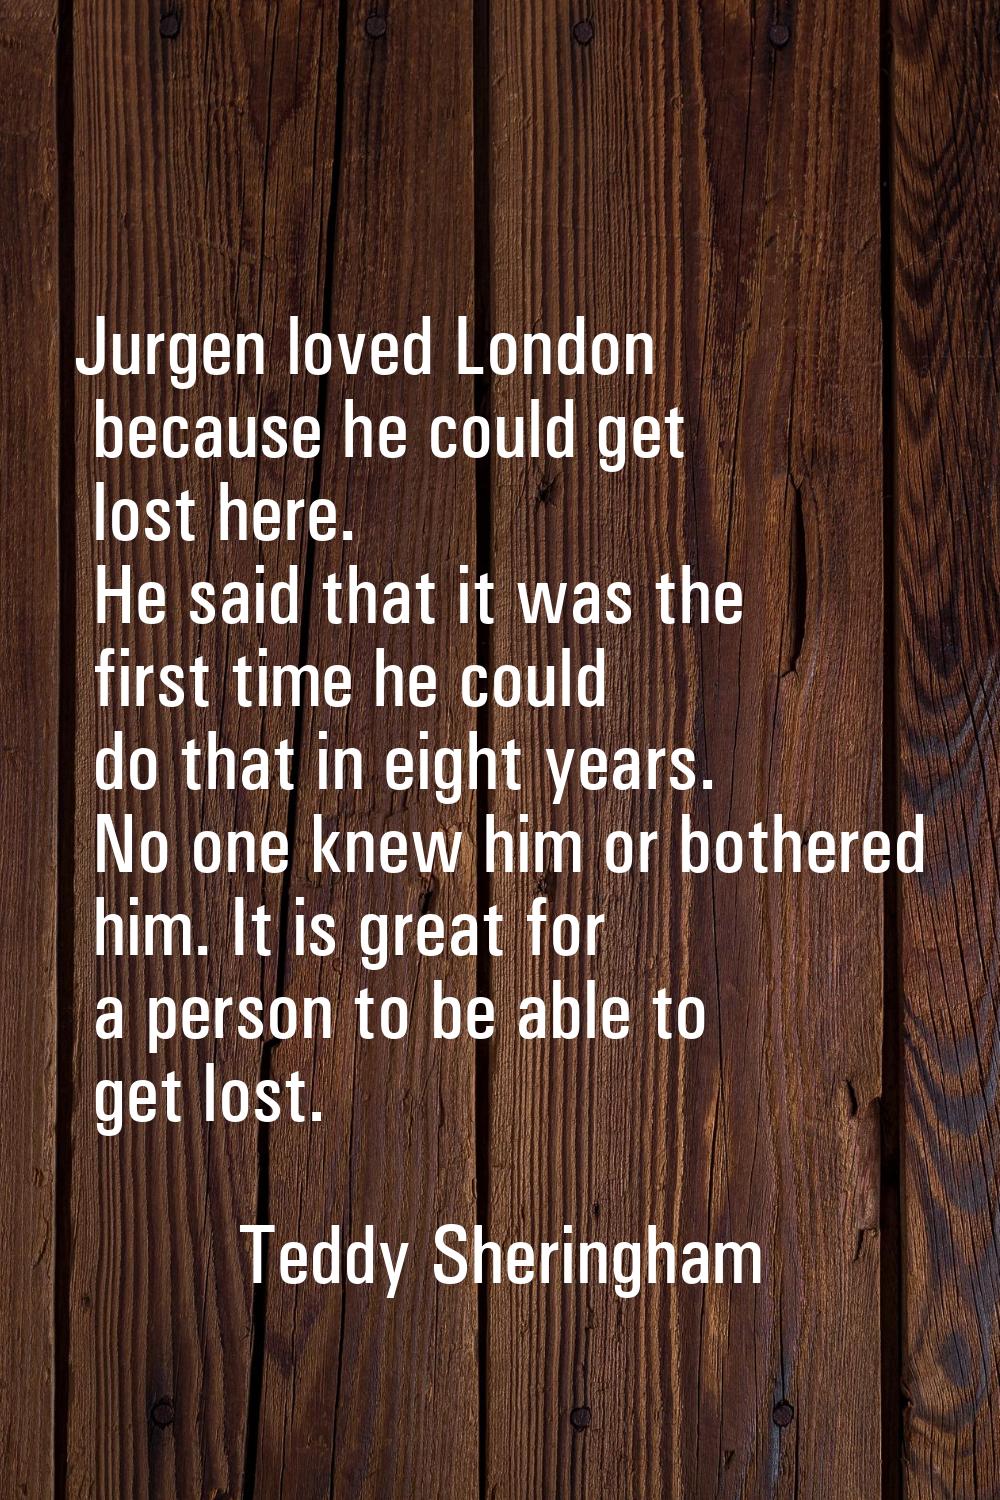 Jurgen loved London because he could get lost here. He said that it was the first time he could do 